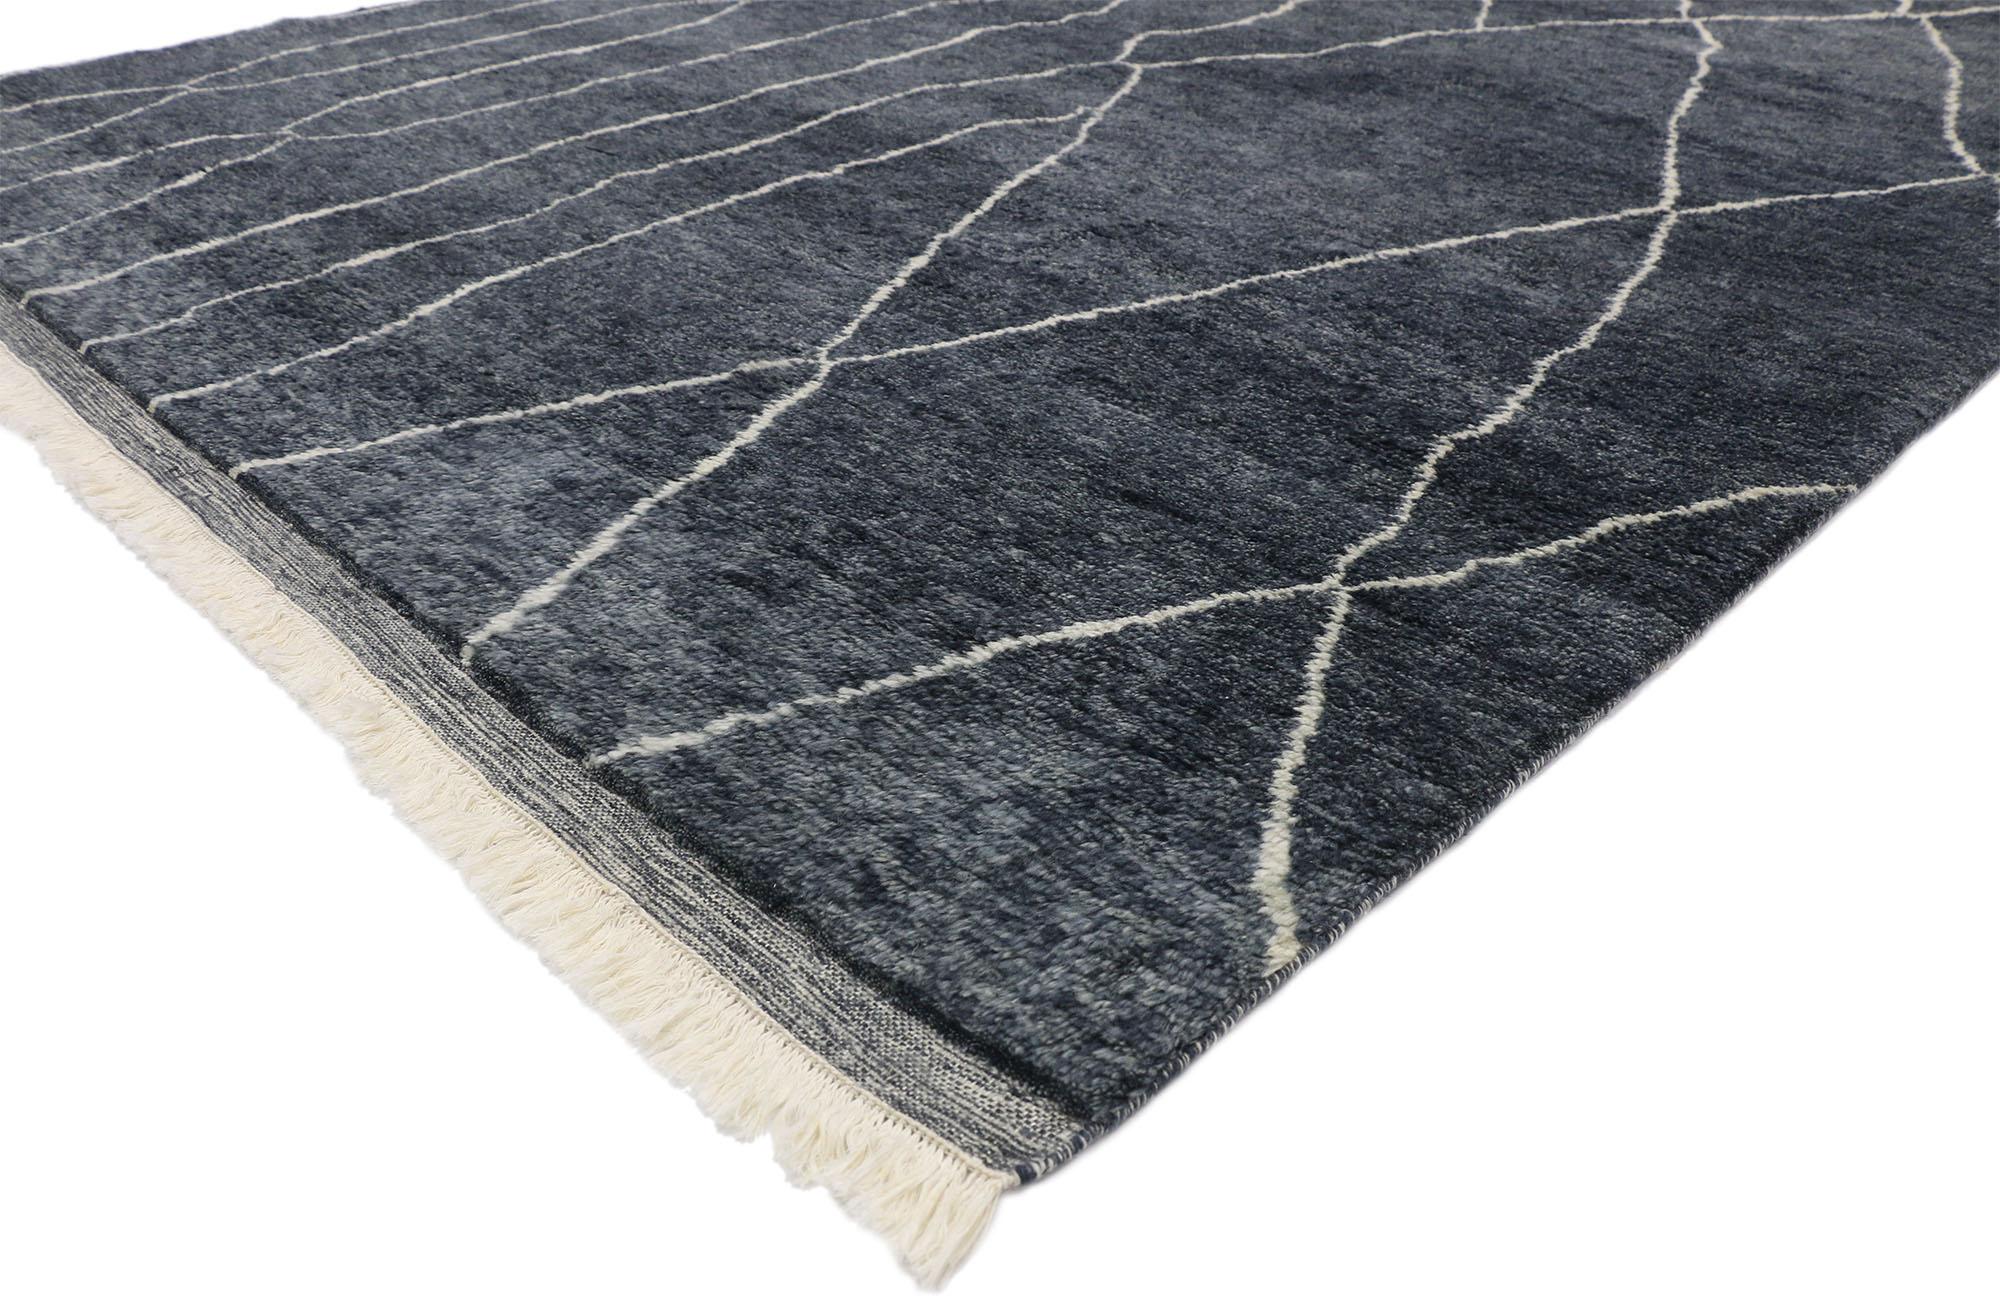 30474 contemporary Scandi Moroccan Area rug with New Nordic and Luxe Sultry style. This hand knotted wool contemporary Moroccan area rug showcases sultry dark backdrop with Stark lines that crisscross in an organic manner, creating an irregular